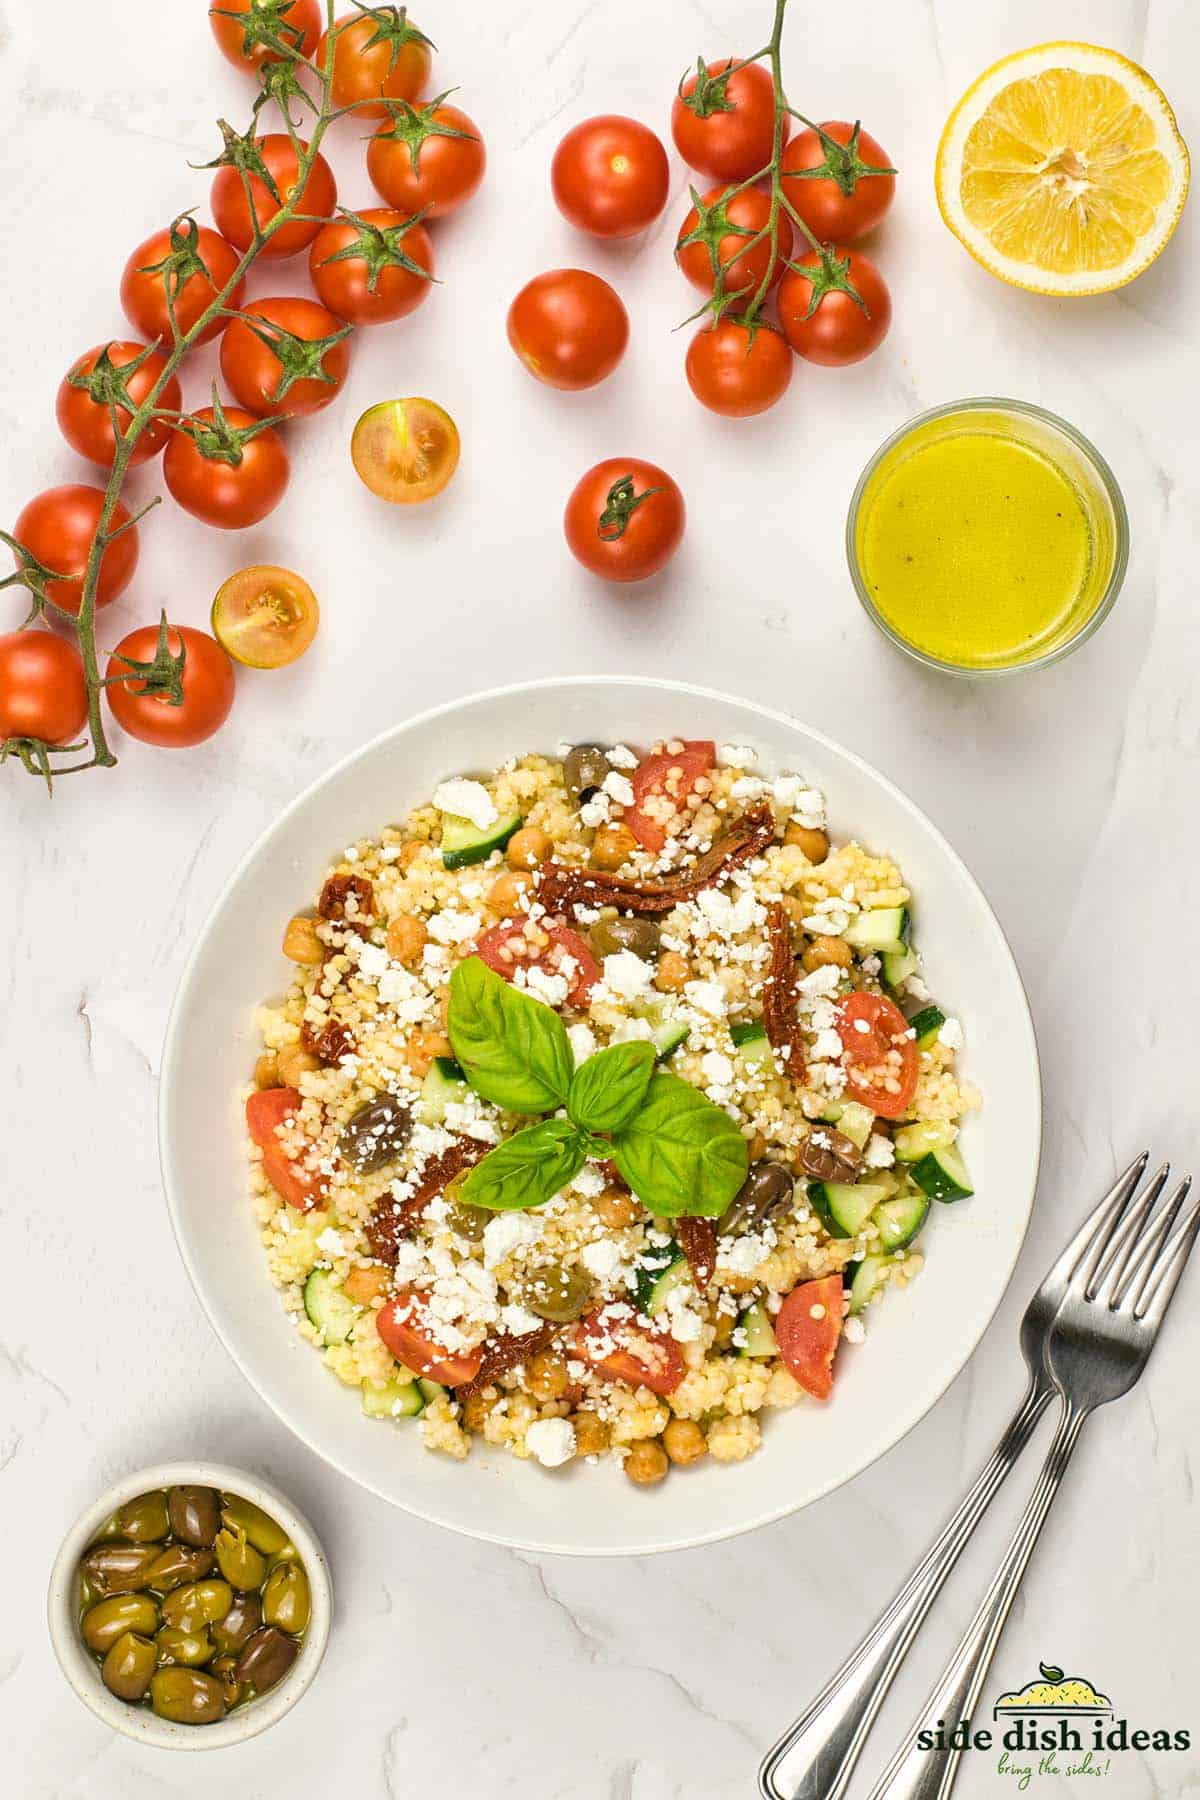 a bowl of mediterranean couscous salad next to fresh tomatoes, olives, olive oil and a lemon